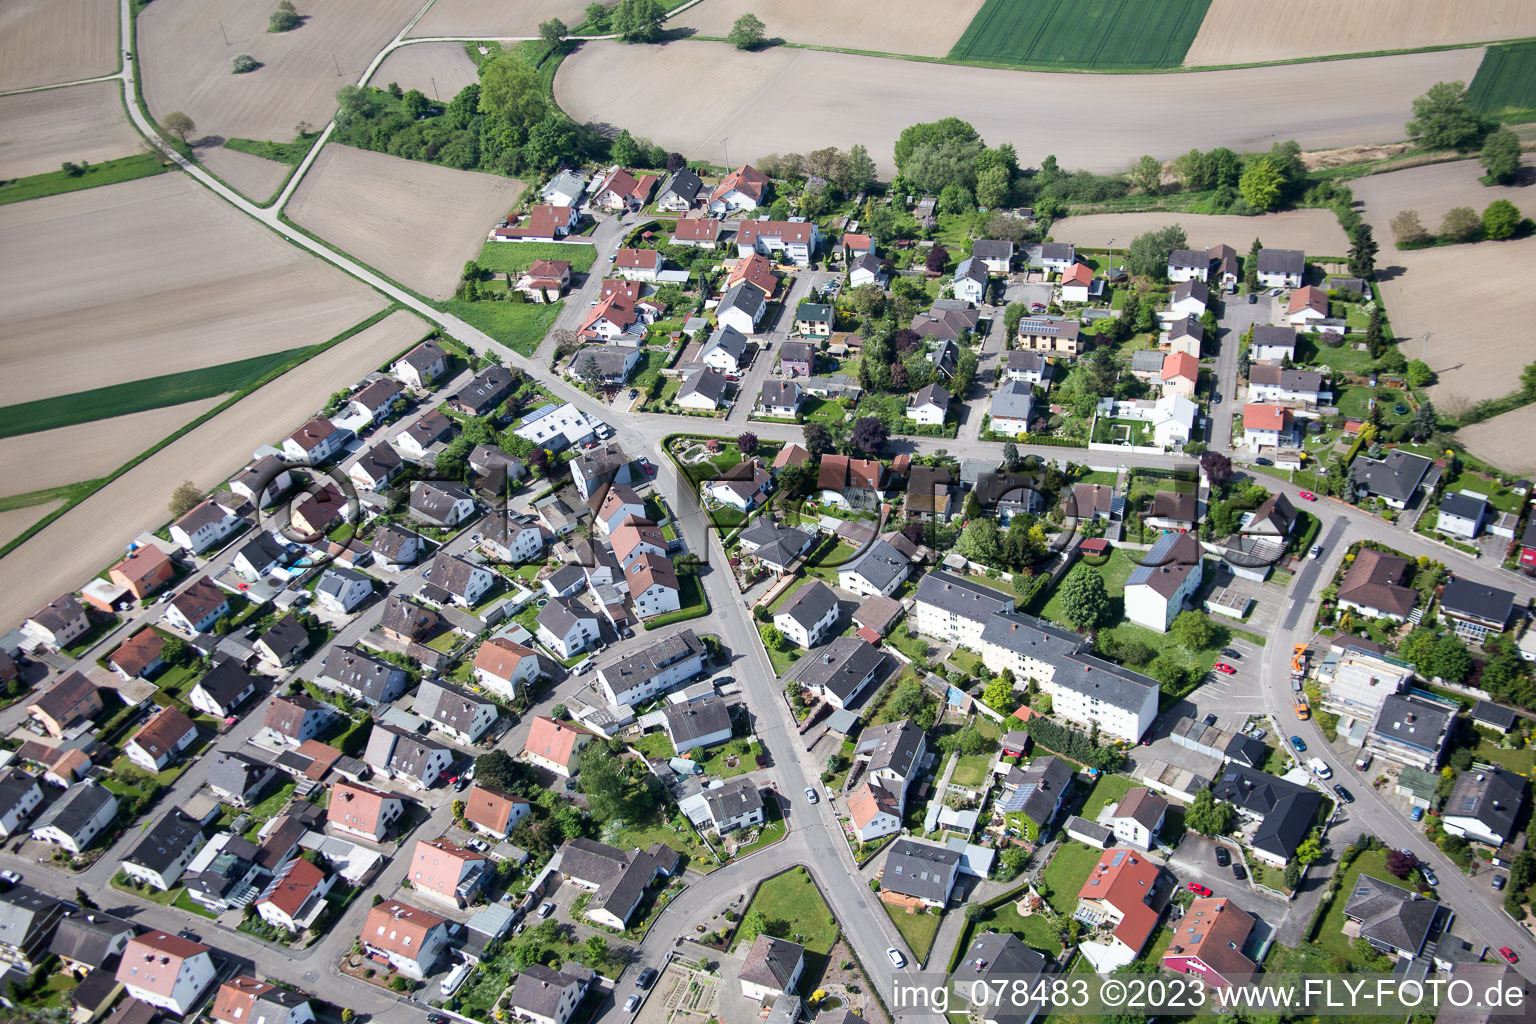 Hagenbach in the state Rhineland-Palatinate, Germany from the drone perspective